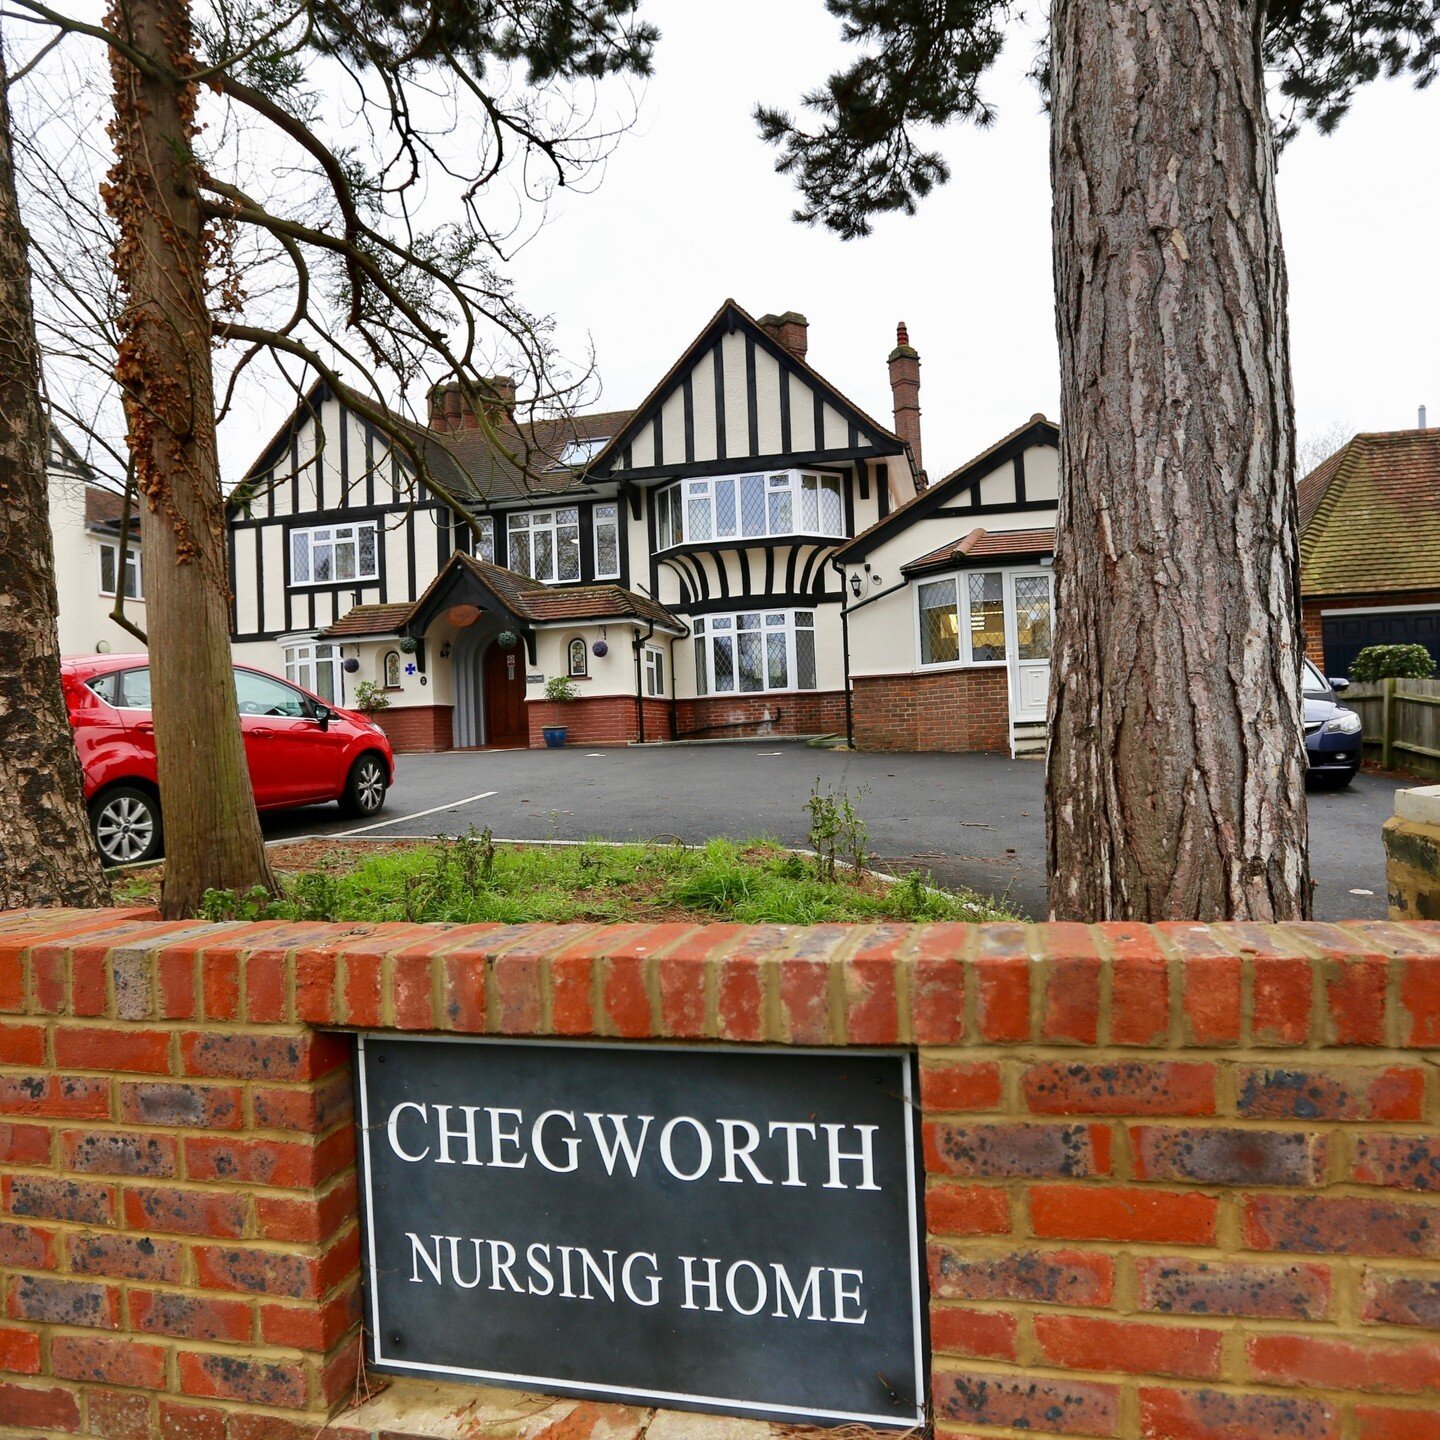 Are you looking for the perfect home for your loved one? 💙 

We offer a variety of different care types. From palliative care to dementia, we can help find the best one for you.

Head to our website to find out more.

#ChegworthNursingHome #LondonCa